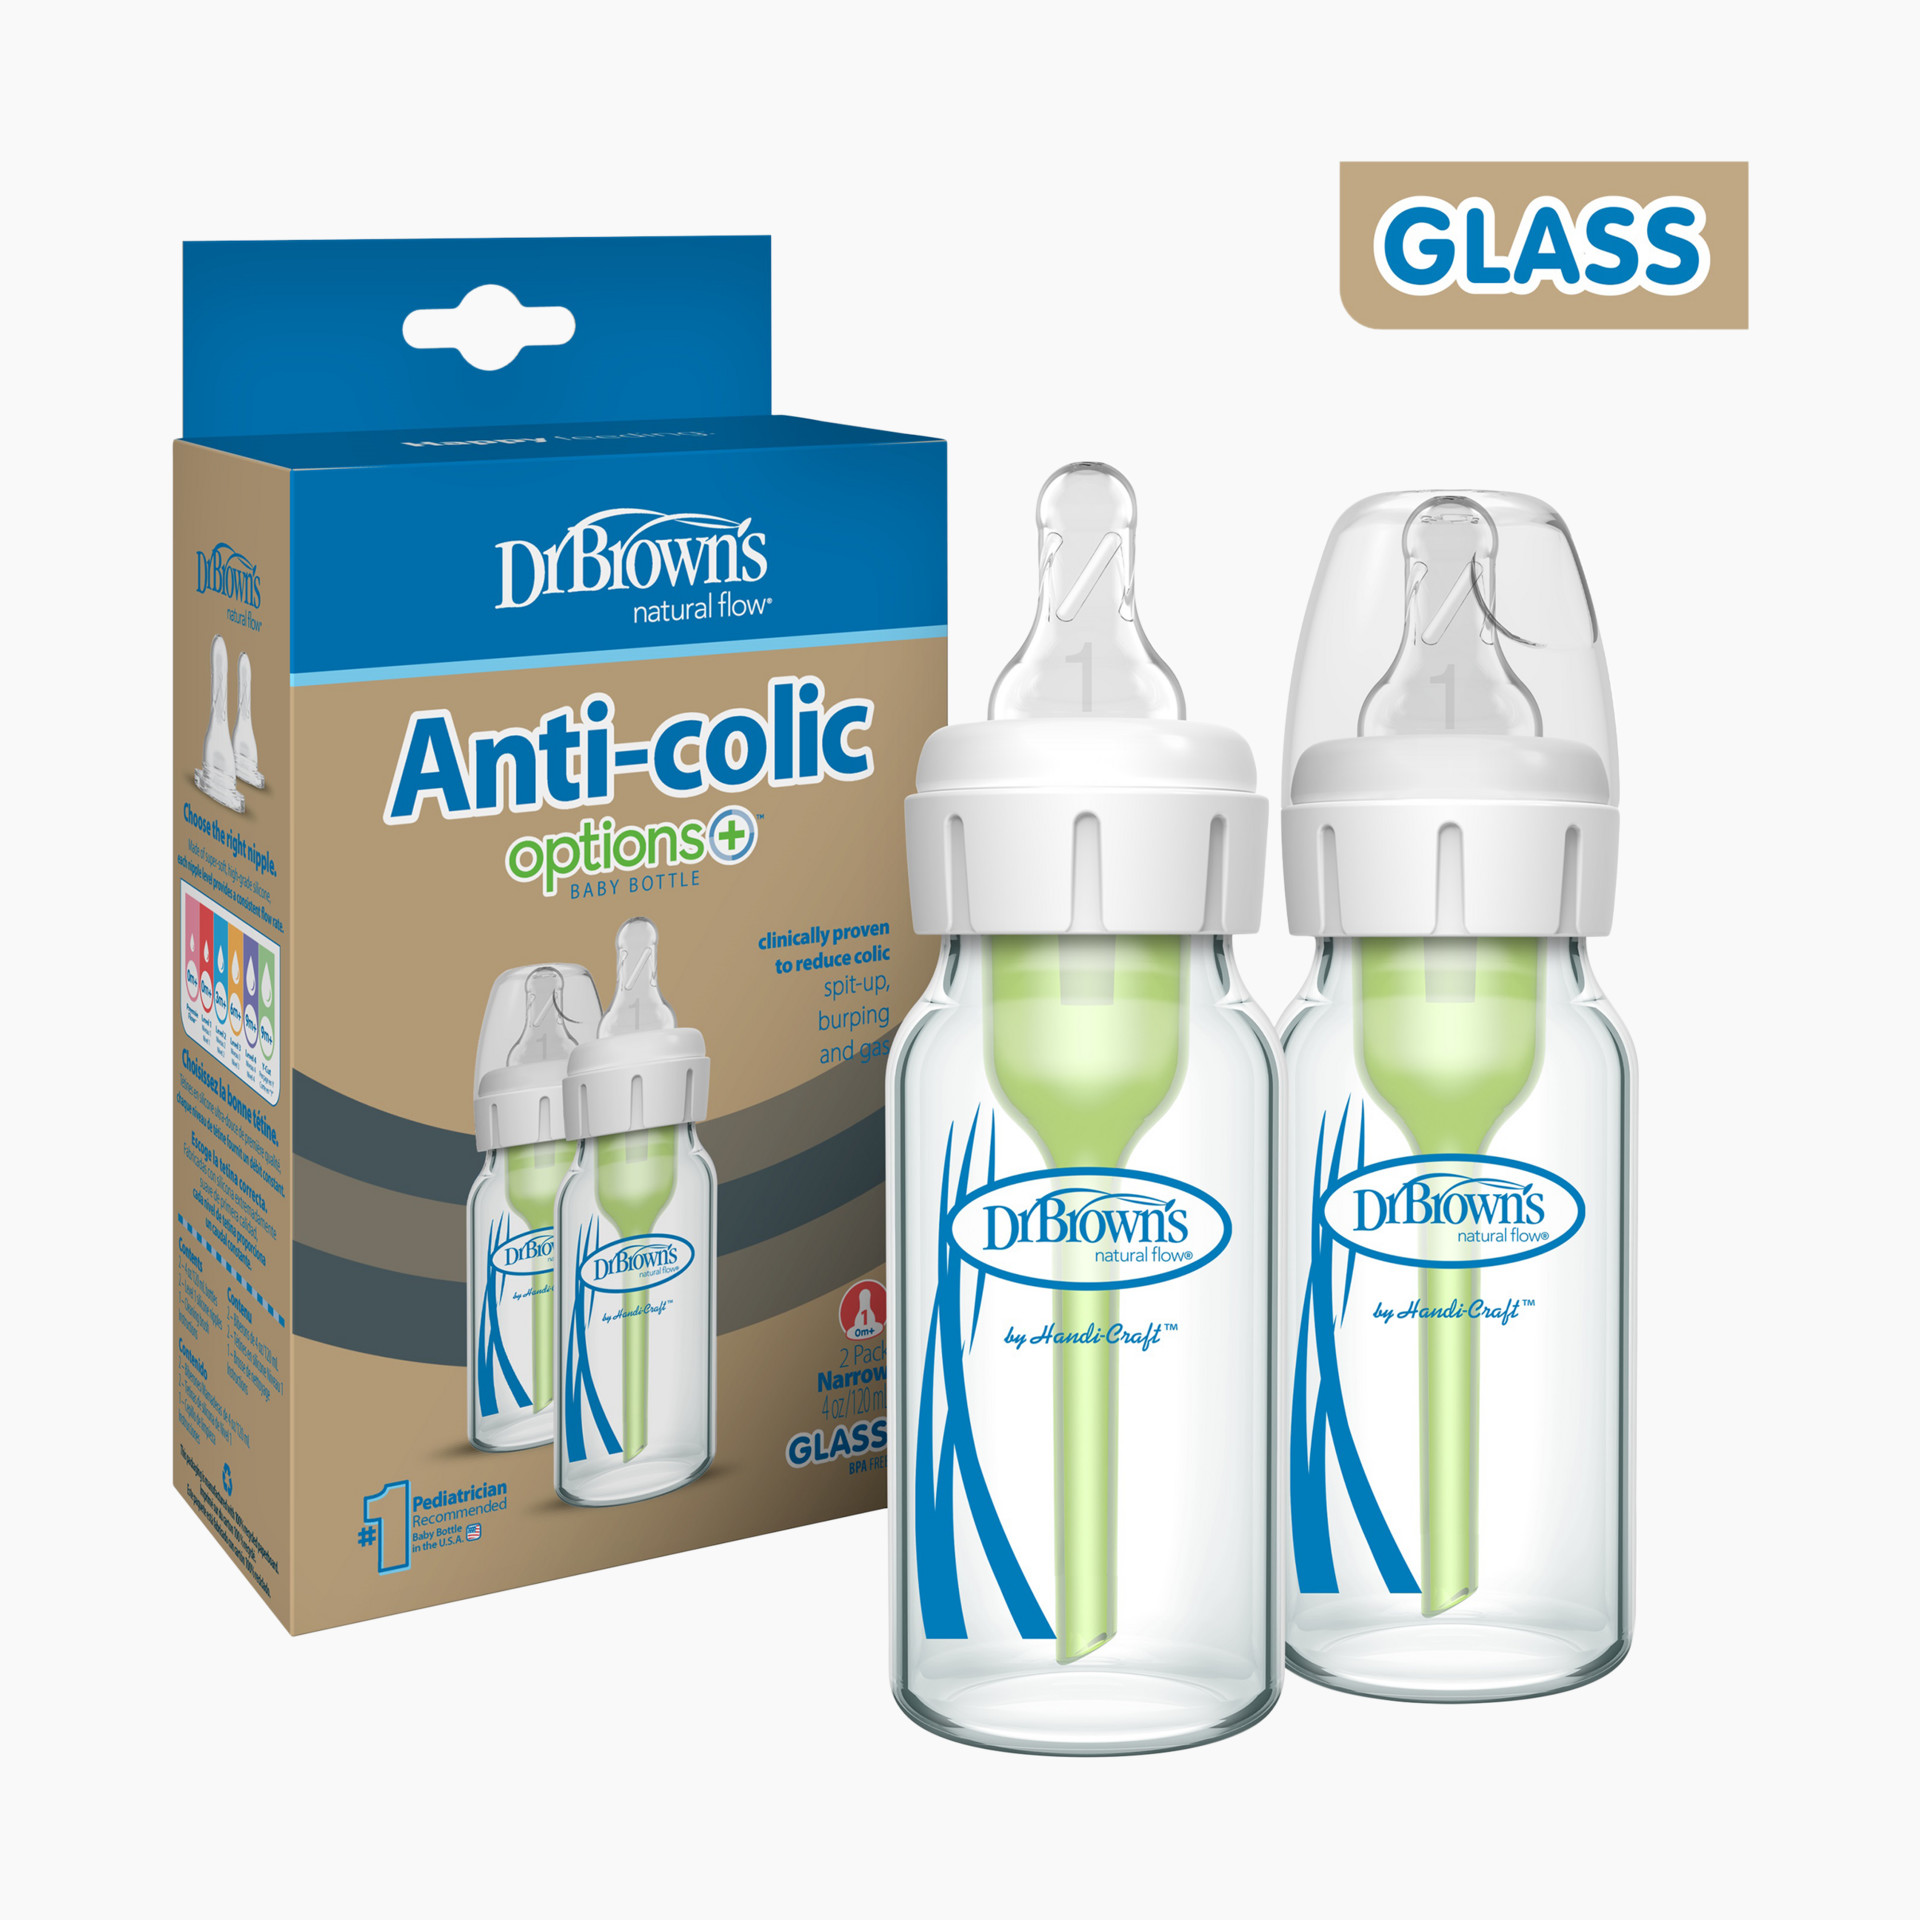 Dr. Brown's 6-Pack 8 oz. Narrow-Neck Bottles in Clear